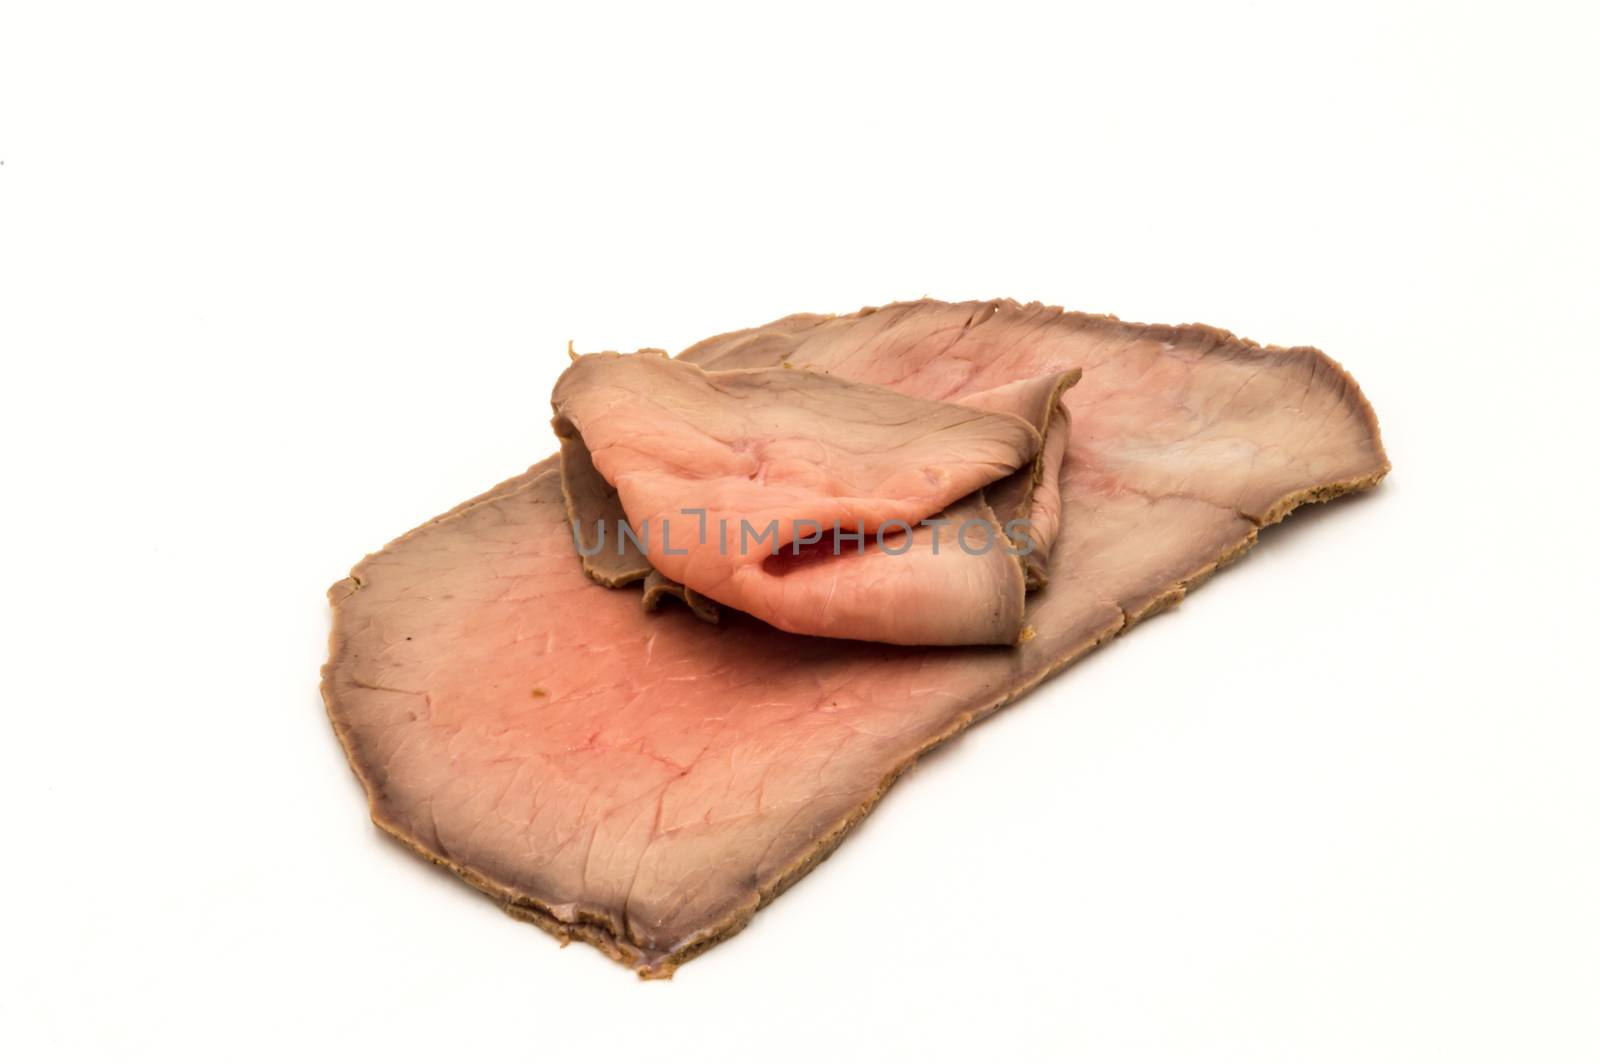 slices of roast beef neatly arranged  by Philou1000